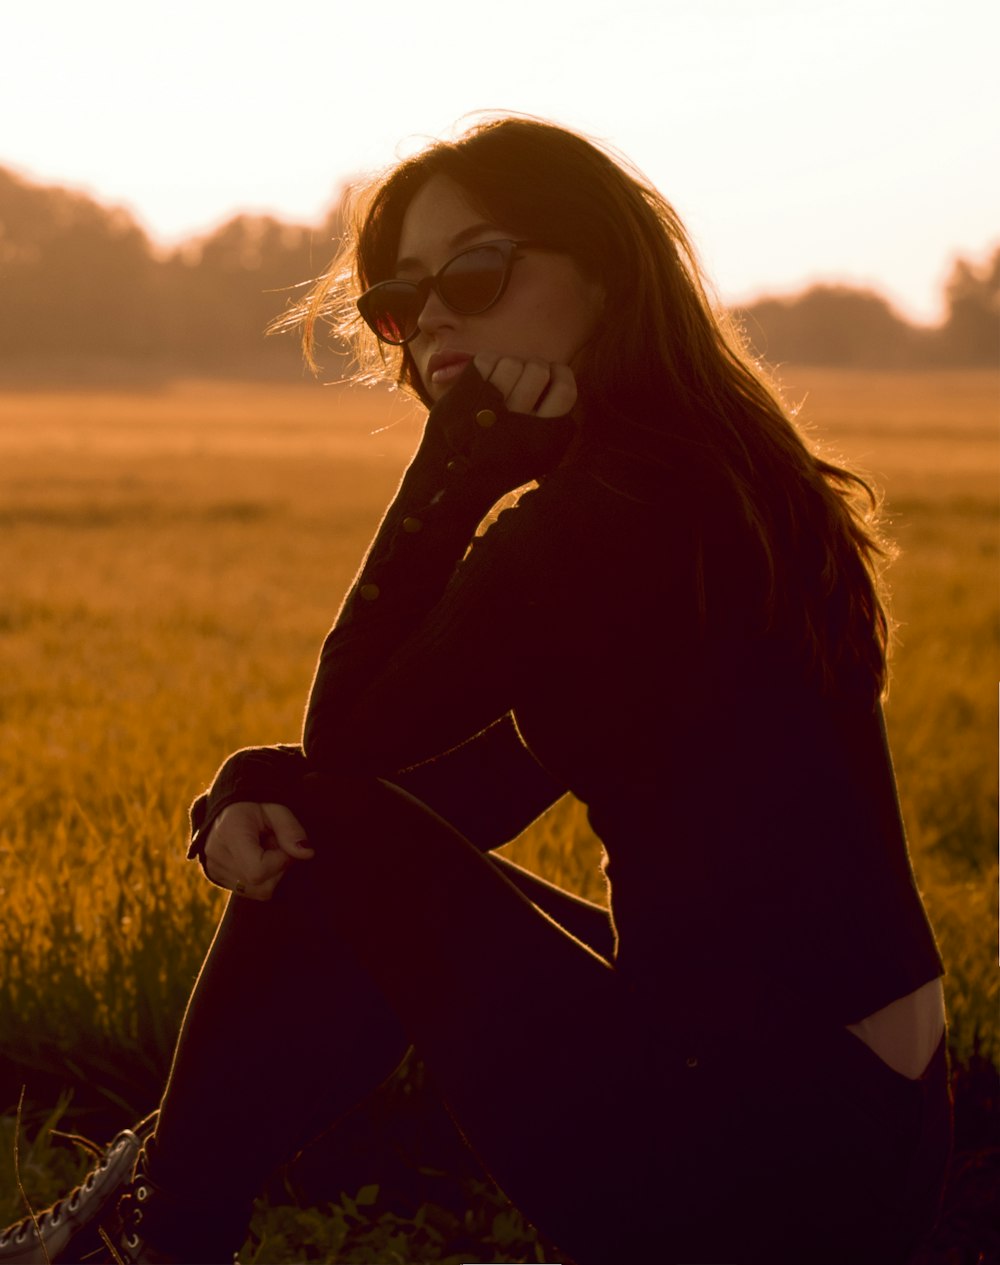 woman in black long sleeve shirt and black sunglasses standing on green grass field during daytime